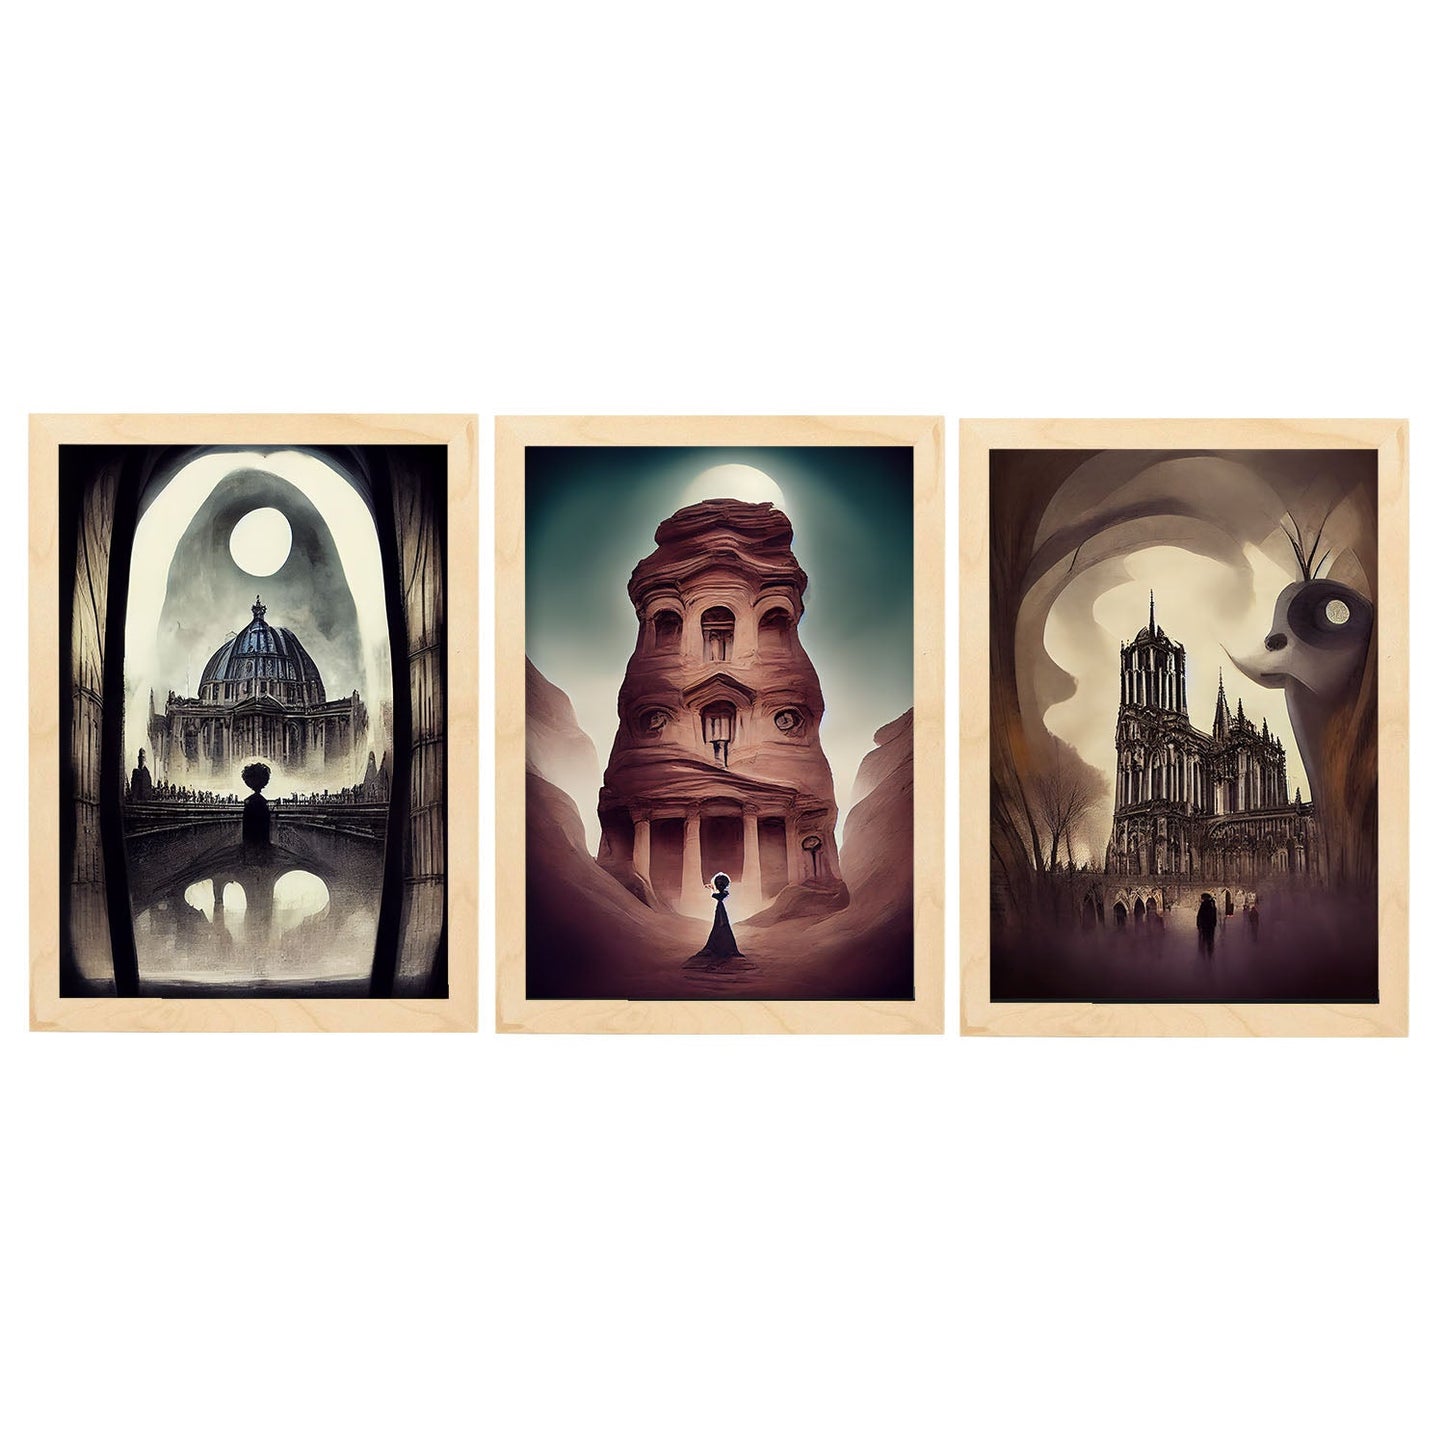 Burton style Illustrations of monuments and cities inspired by Burton's Dark and Goth art Interior Design and Decoration Set Collection 10-Artwork-Nacnic-A4-Marco Madera clara-Nacnic Estudio SL